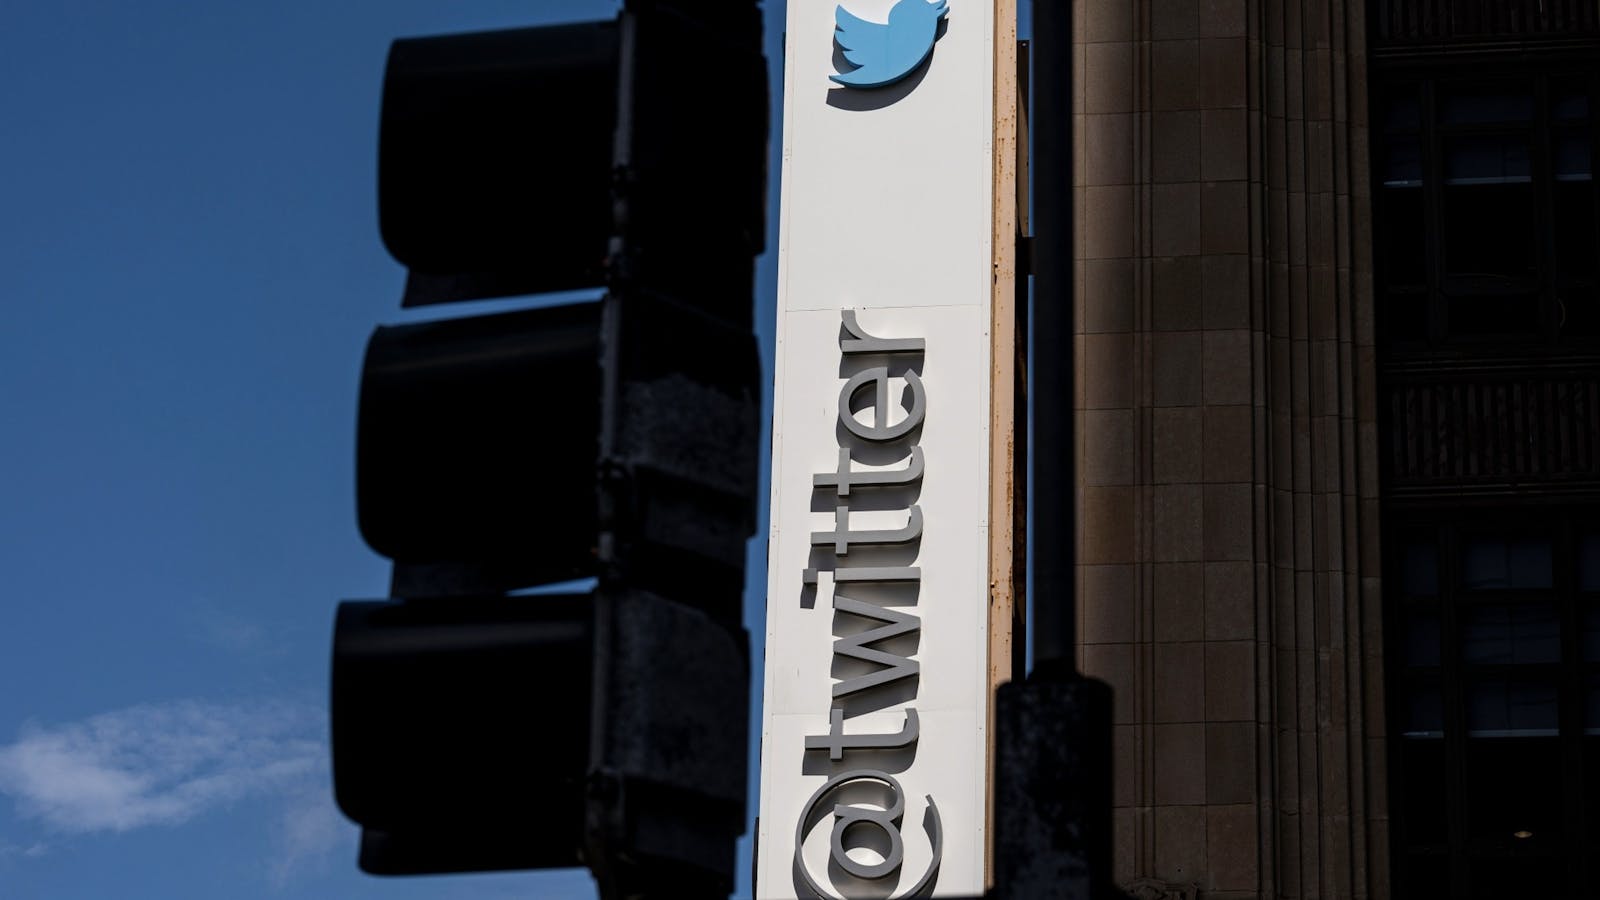 Twitter's headquarters. Photo by Bloomberg.